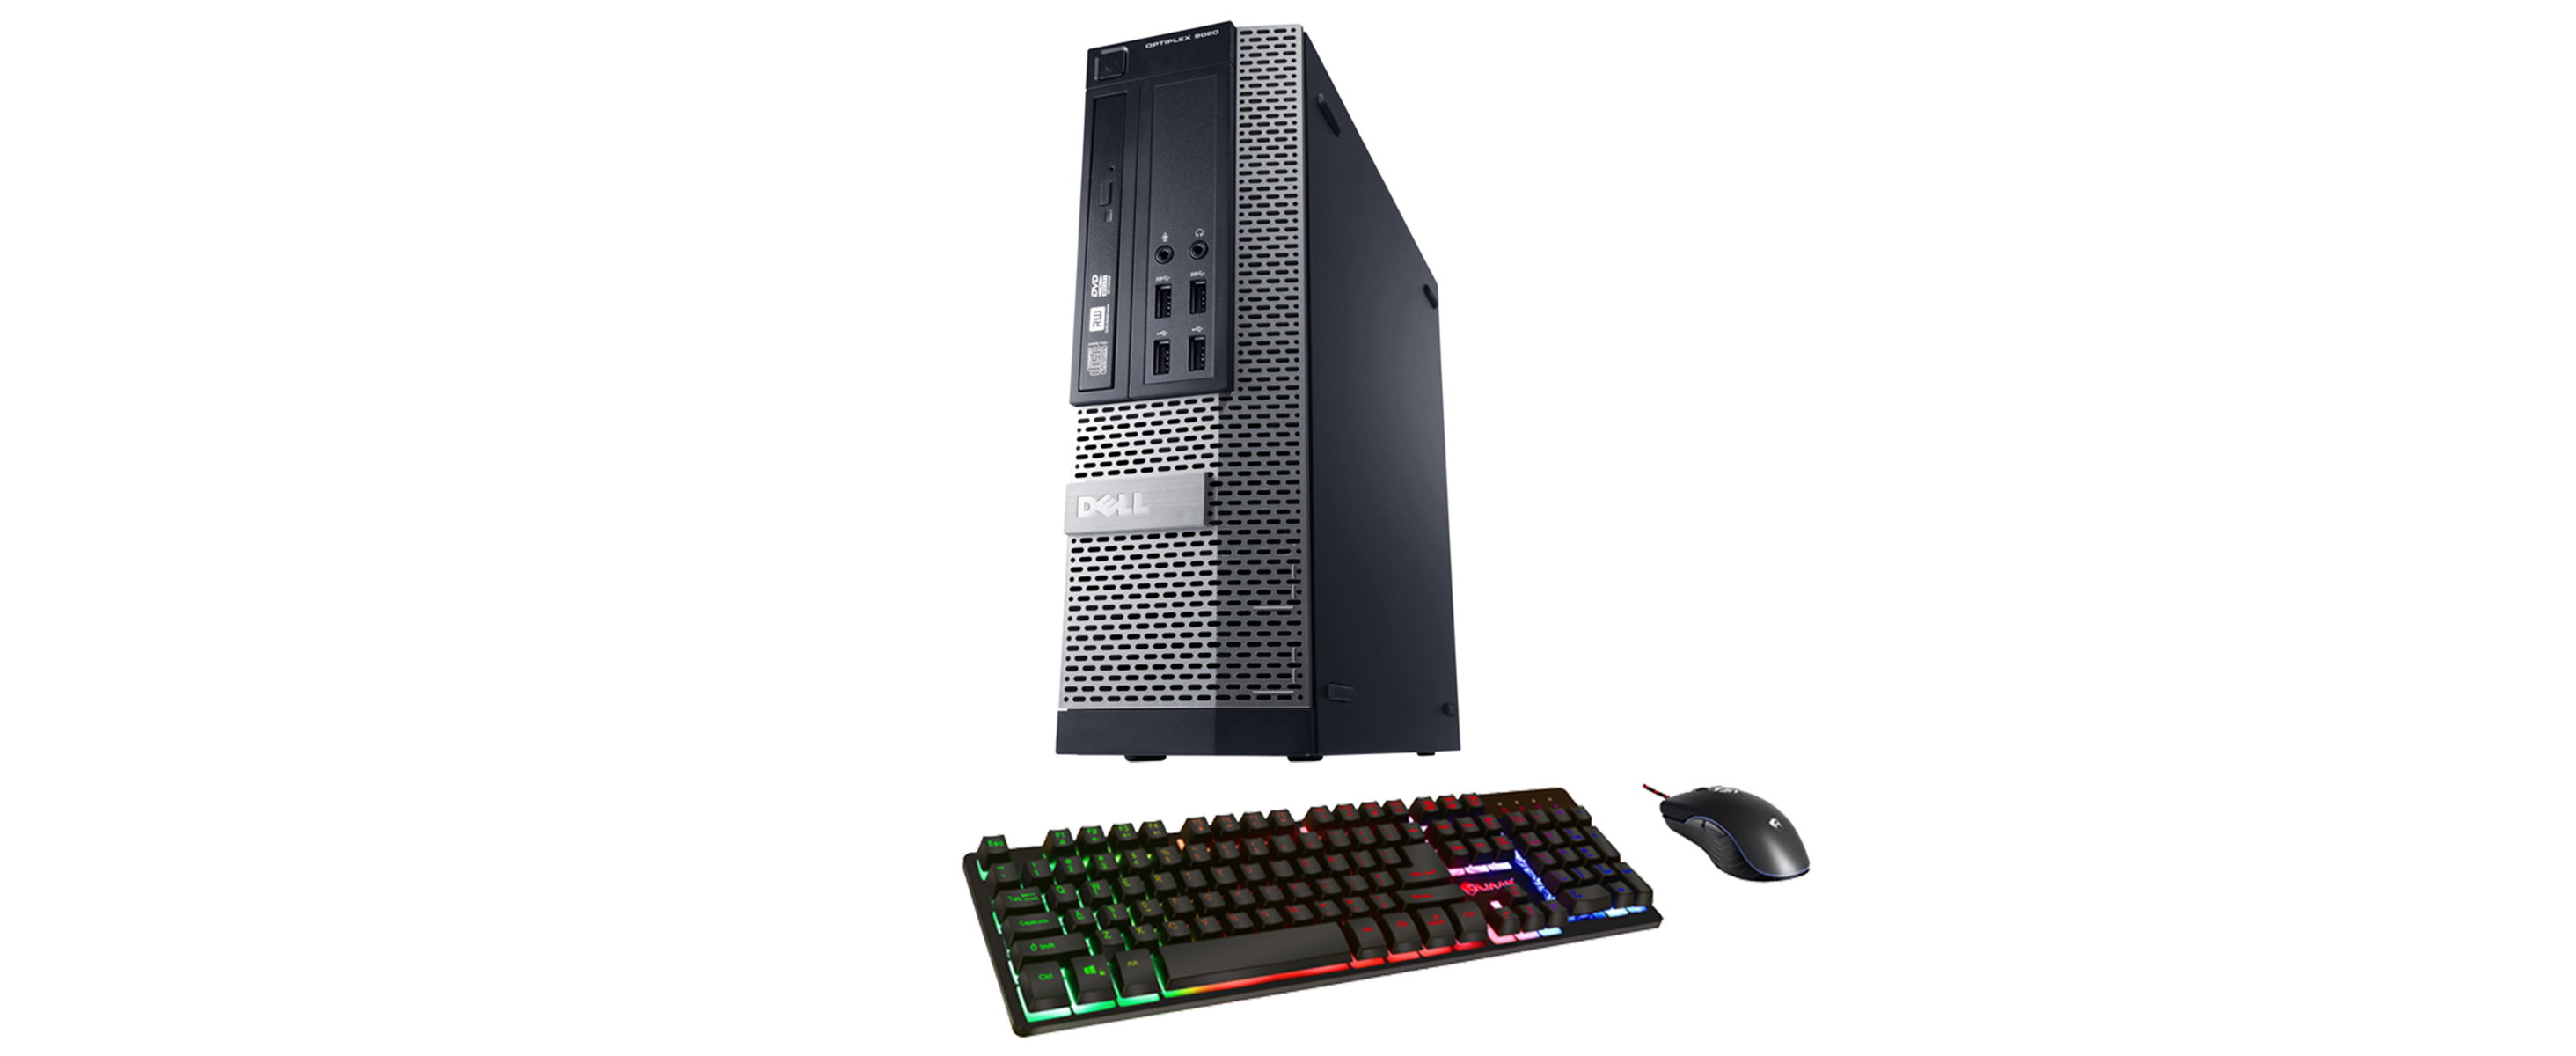 Refurbished: Dell OptiPlex 9020 SFF Computer PC i5 4570 3.2Ghz 32GB DDR3  RAM 1TB SSD NVIDIA GeForce GT 1030 2GB Win 10 Pro WIFI with Gaming PC  Keyboard & Mouse HAJAAN HC510 HDMI 